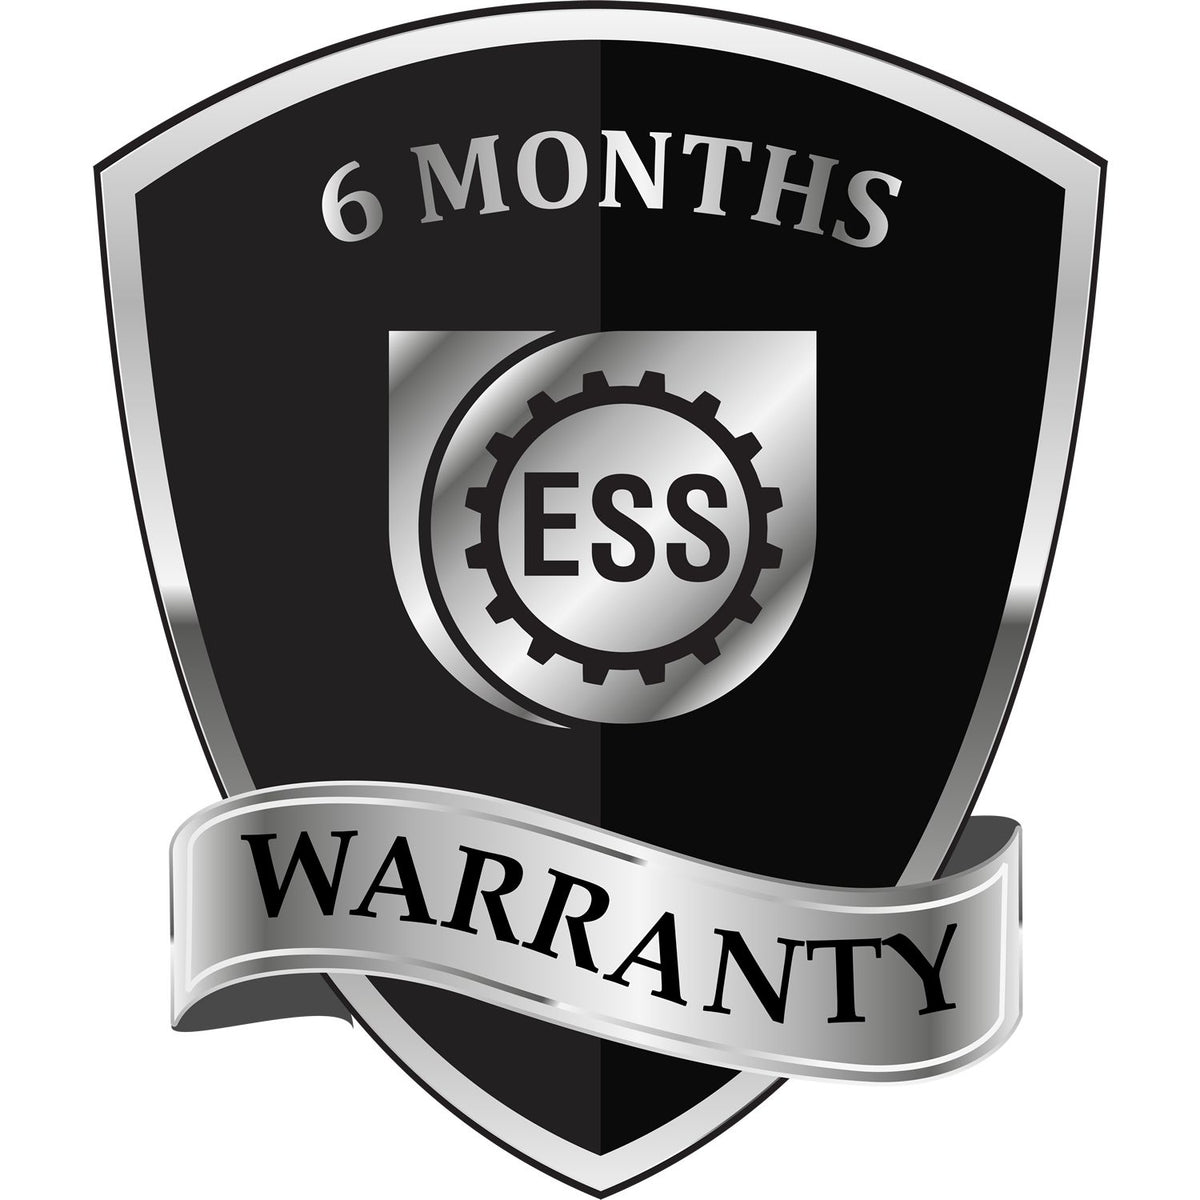 A badge or emblem showing a warranty icon for the Self-Inking Rectangular Missouri Notary Stamp